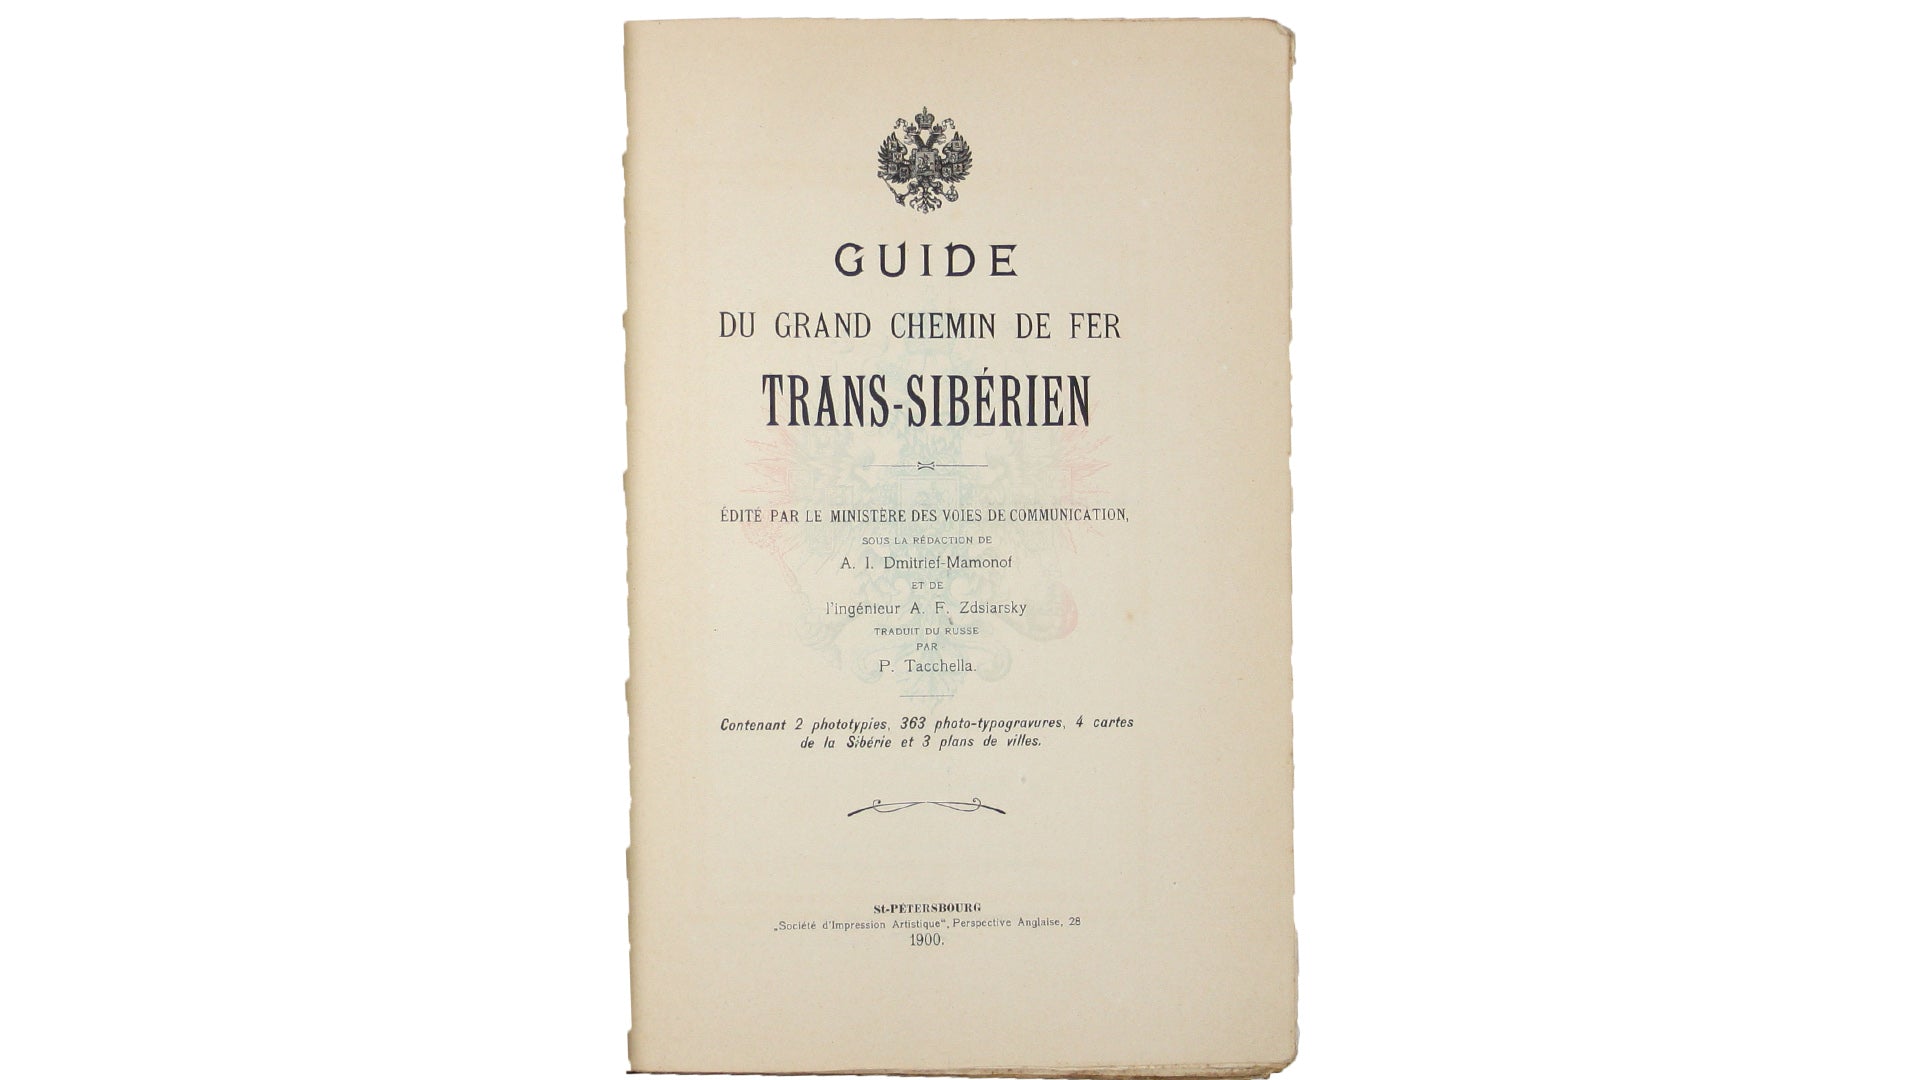 Guide to the Trans-Siberian Railway